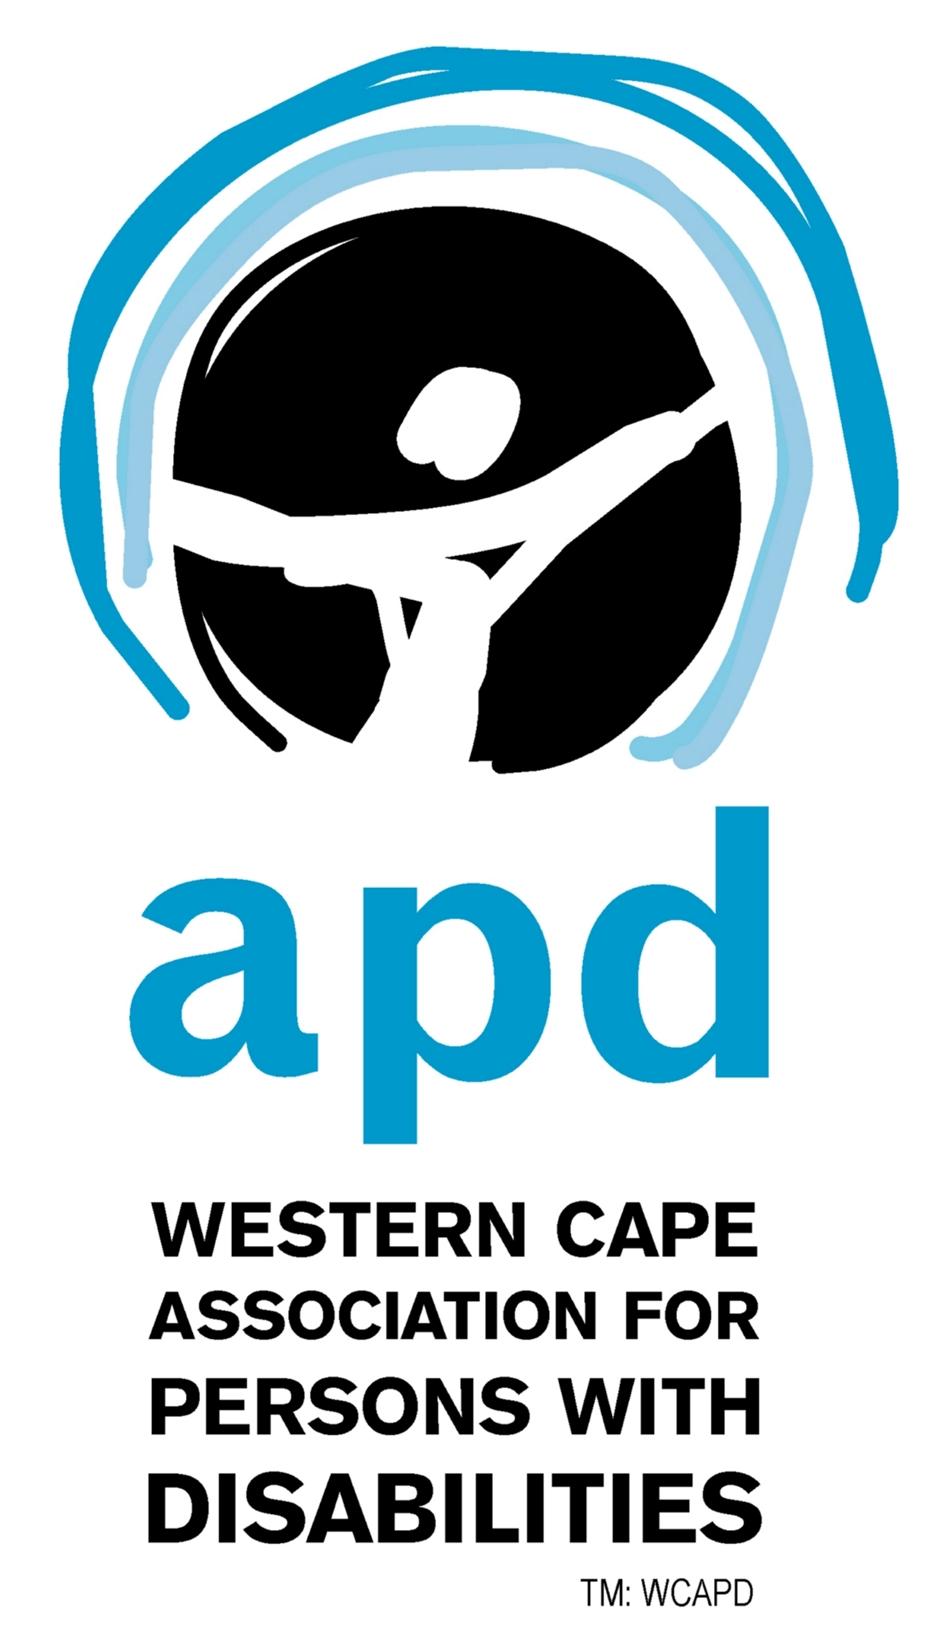 Western Cape Association for Persons with Disabilities